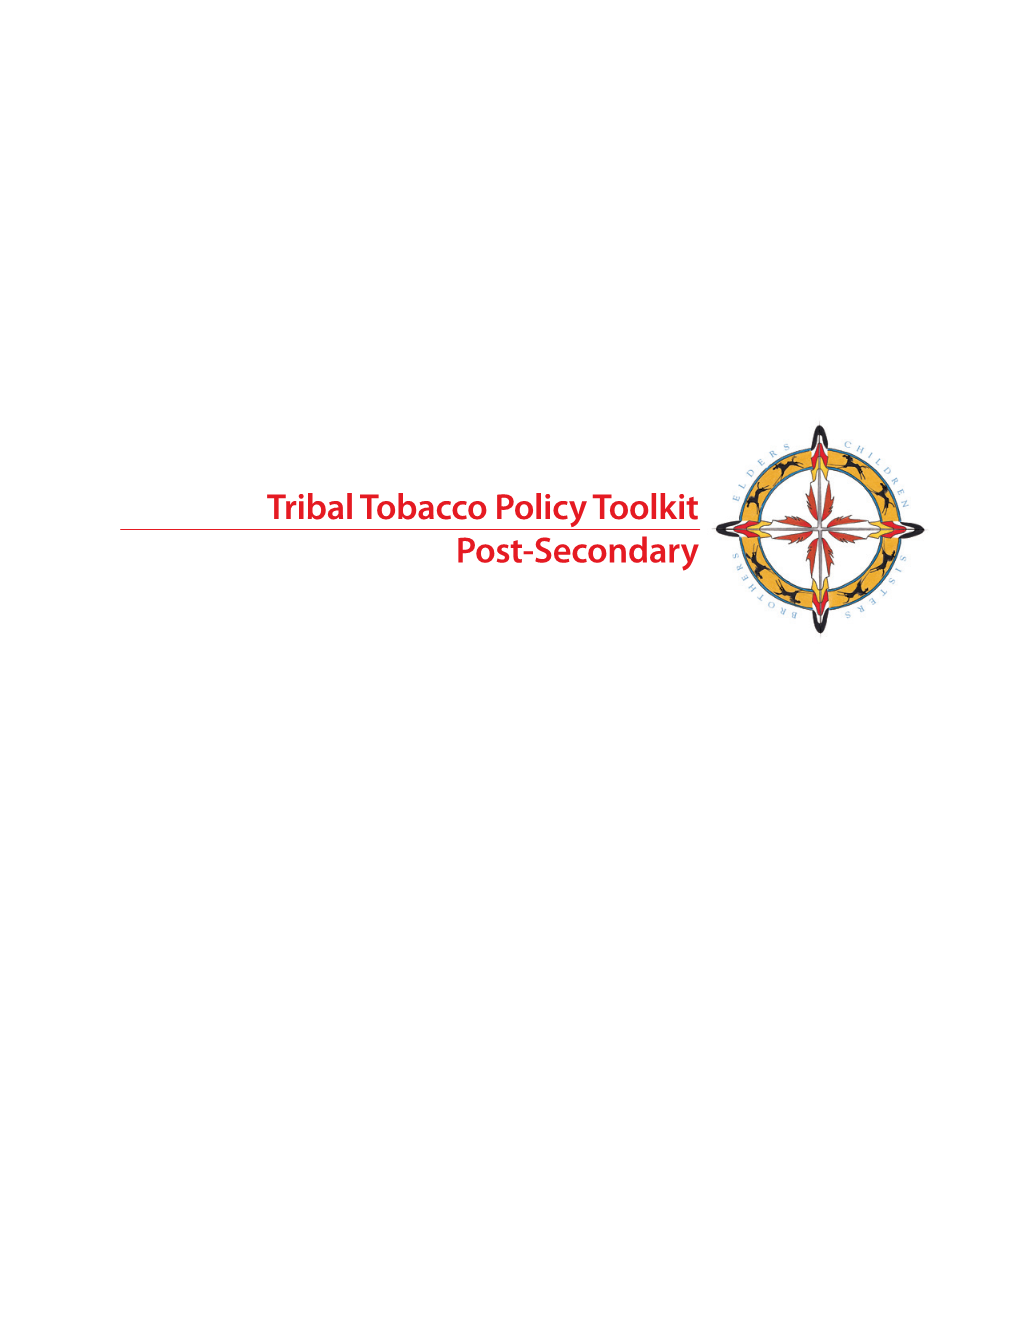 Tribal Tobacco Policy Toolkit Post-Secondary